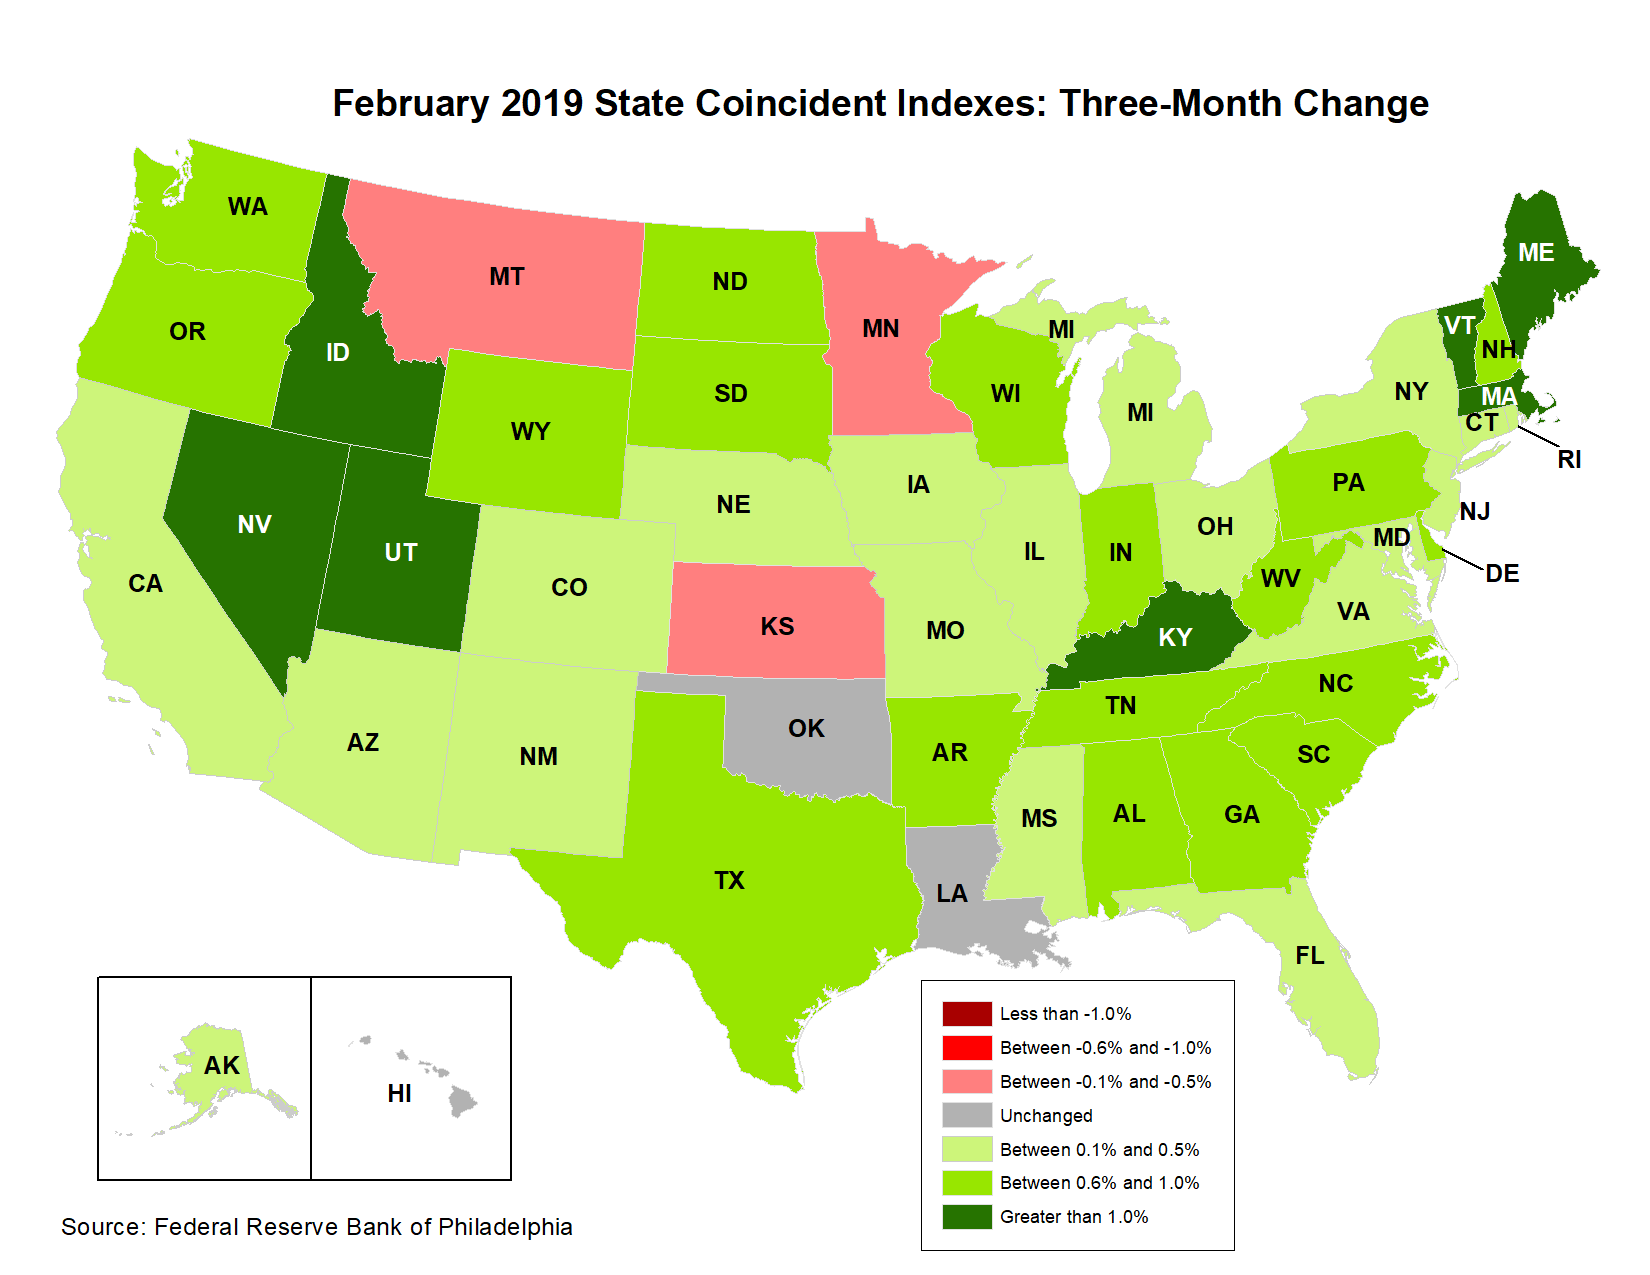 Map of the U.S. showing the State Coincident Indexes Three-Month Change in February 2019